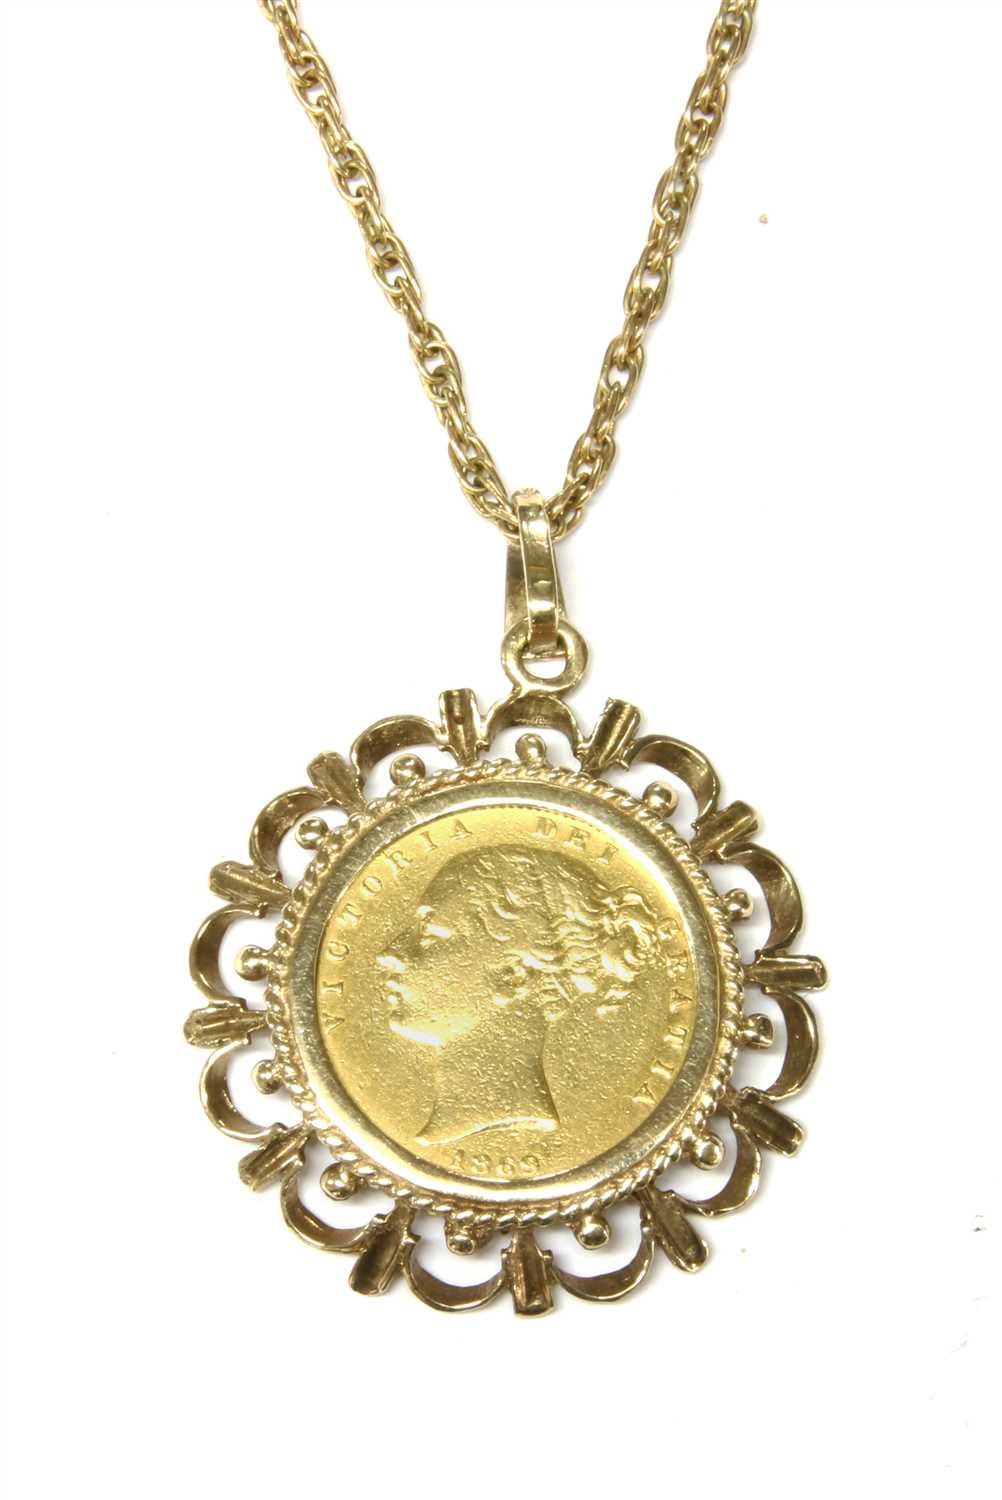 Queen Elizabeth II 22ct gold Sovereign necklace - 1978 **Reserved**